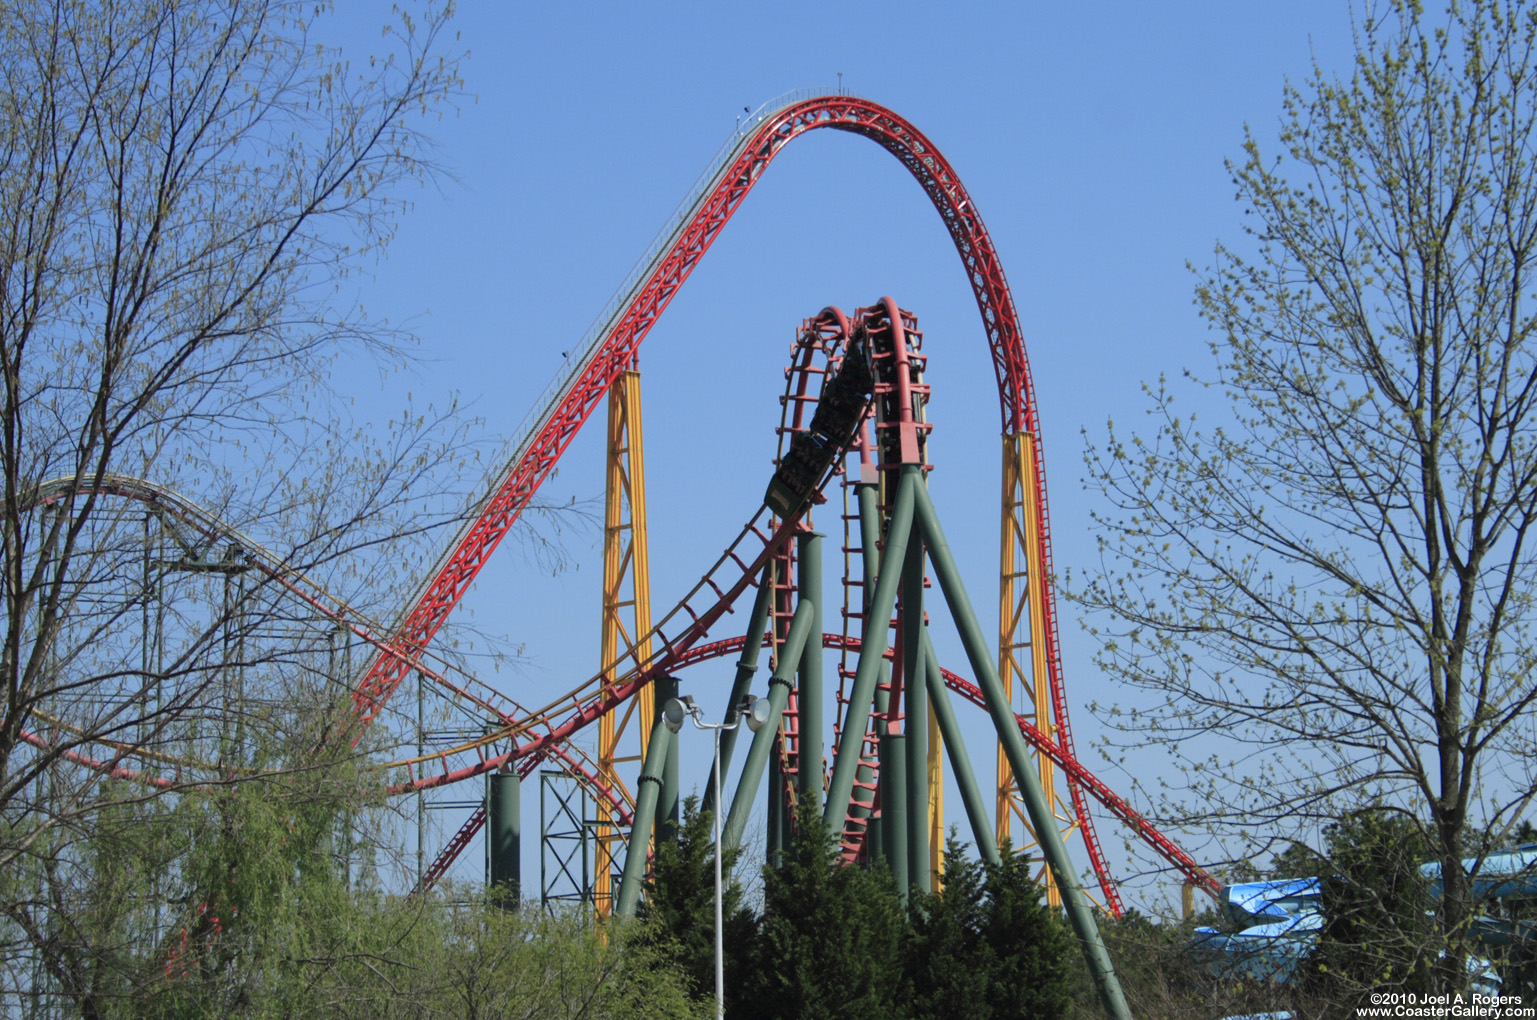 The thrill rides of Kings Dominion